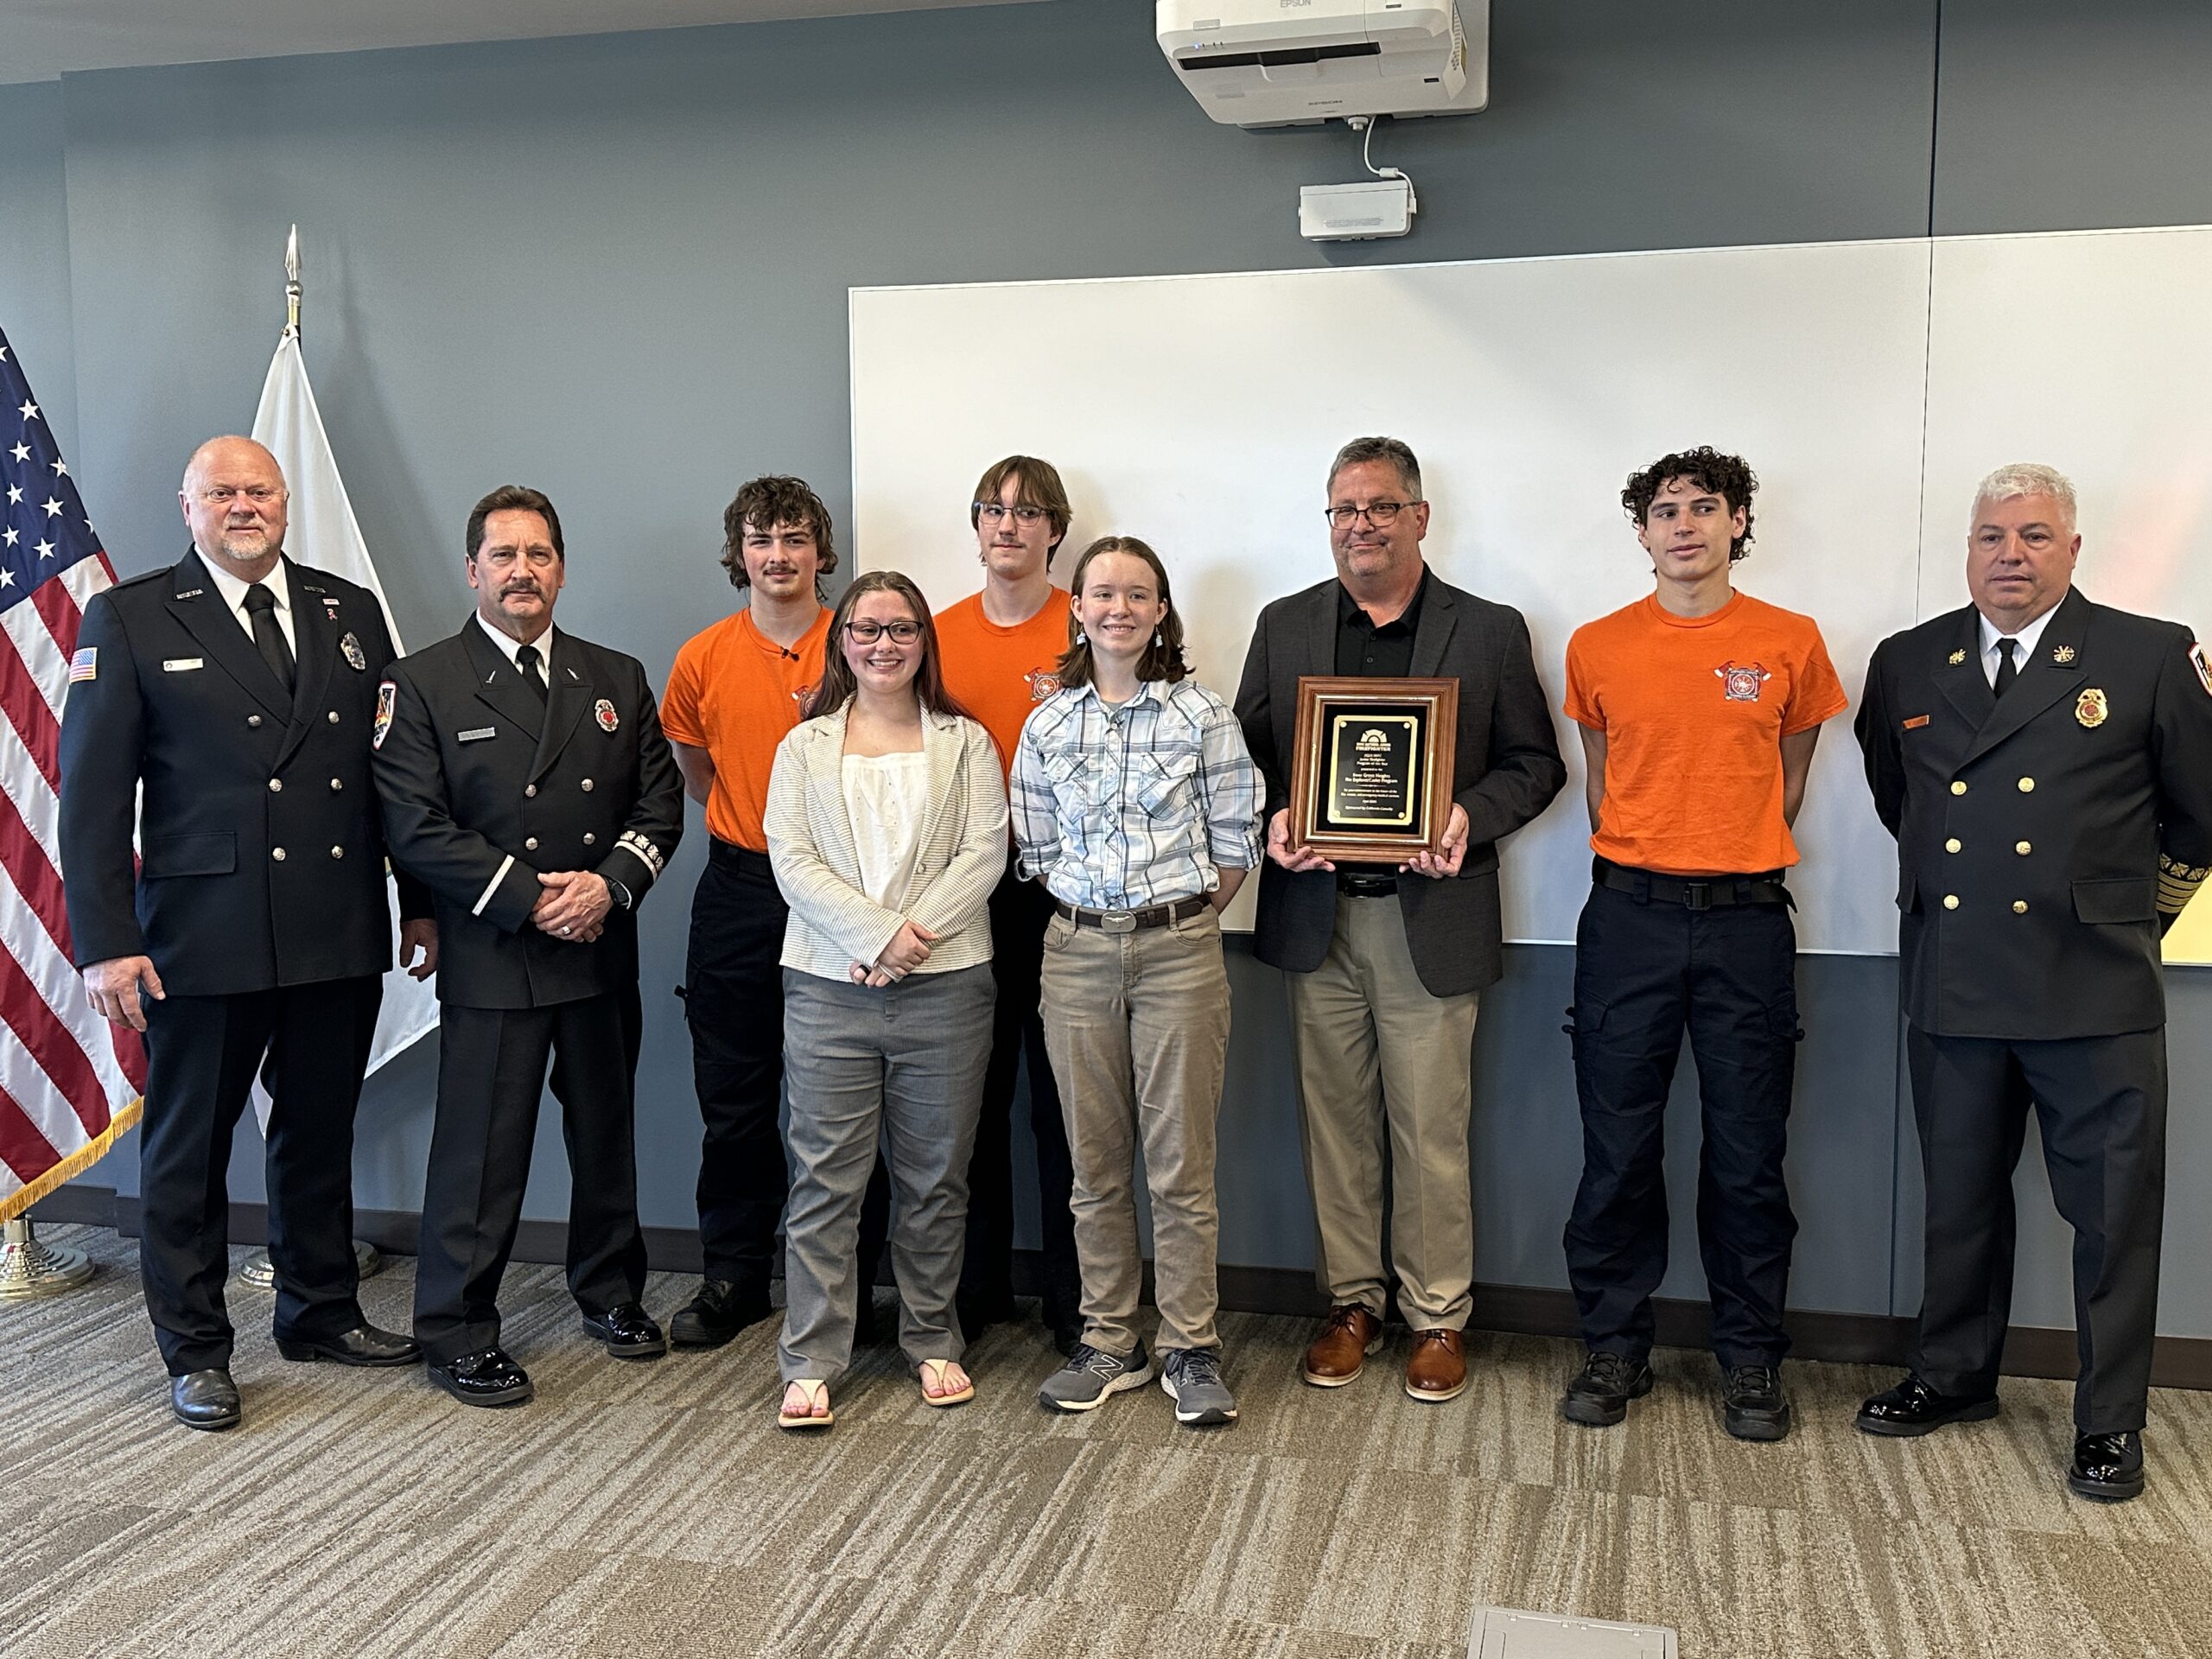 Members of the Inver Grove Heights Explorer Program accept National Junior Firefighter Program of the Year Award